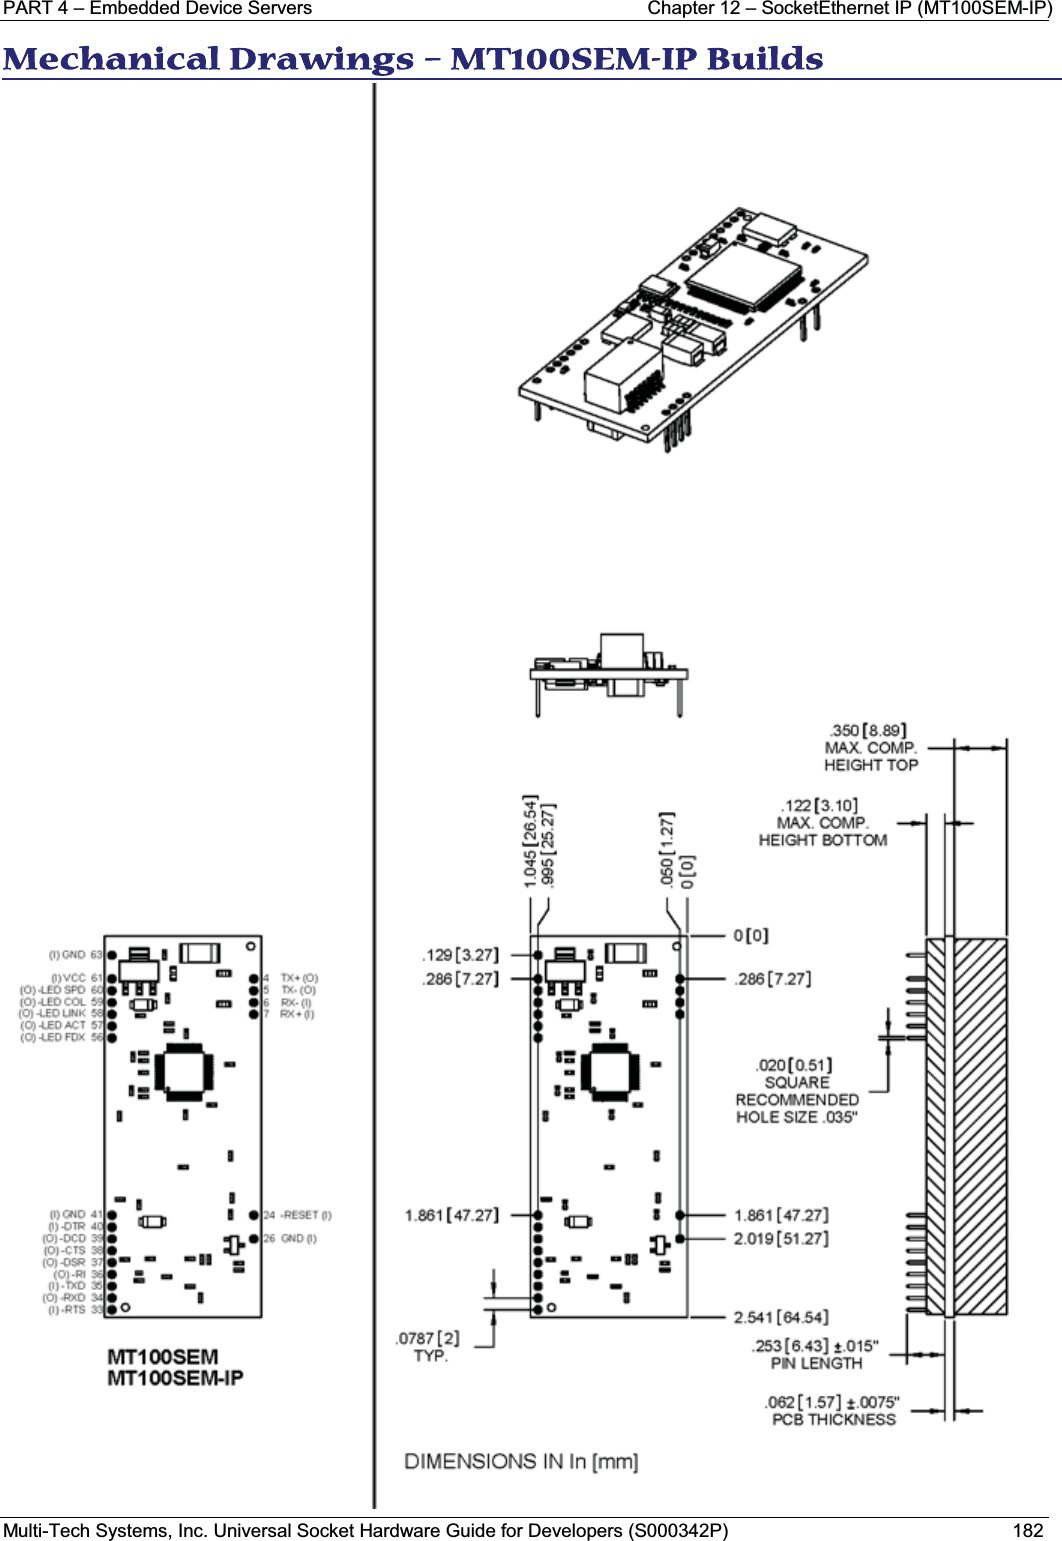 PART 4 – Embedded Device Servers Chapter 12 – SocketEthernet IP (MT100SEM-IP) Multi-Tech Systems, Inc. Universal Socket Hardware Guide for Developers (S000342P) 182MMechanical Drawings – MT100SEM-IP Builds 